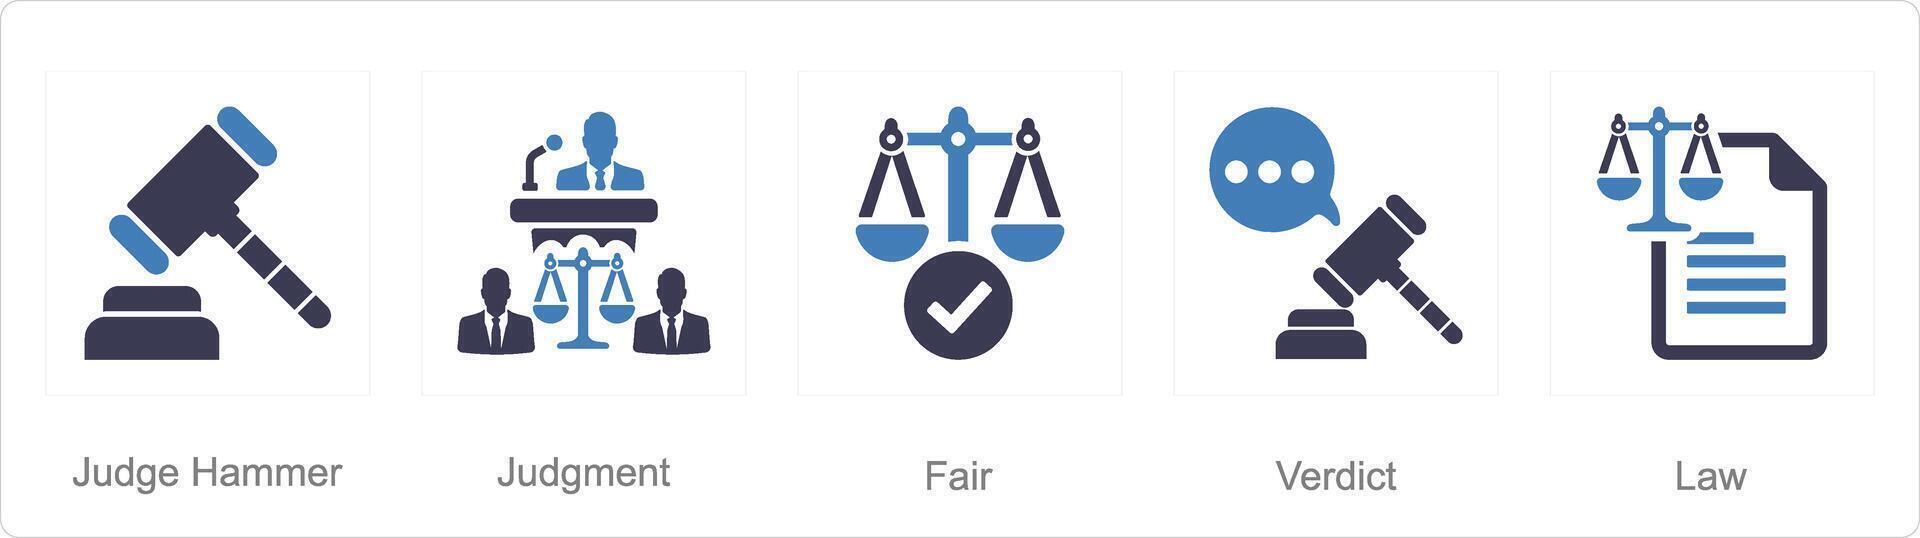 A set of 5 Justice icons as judge hammer, judgement, fair vector